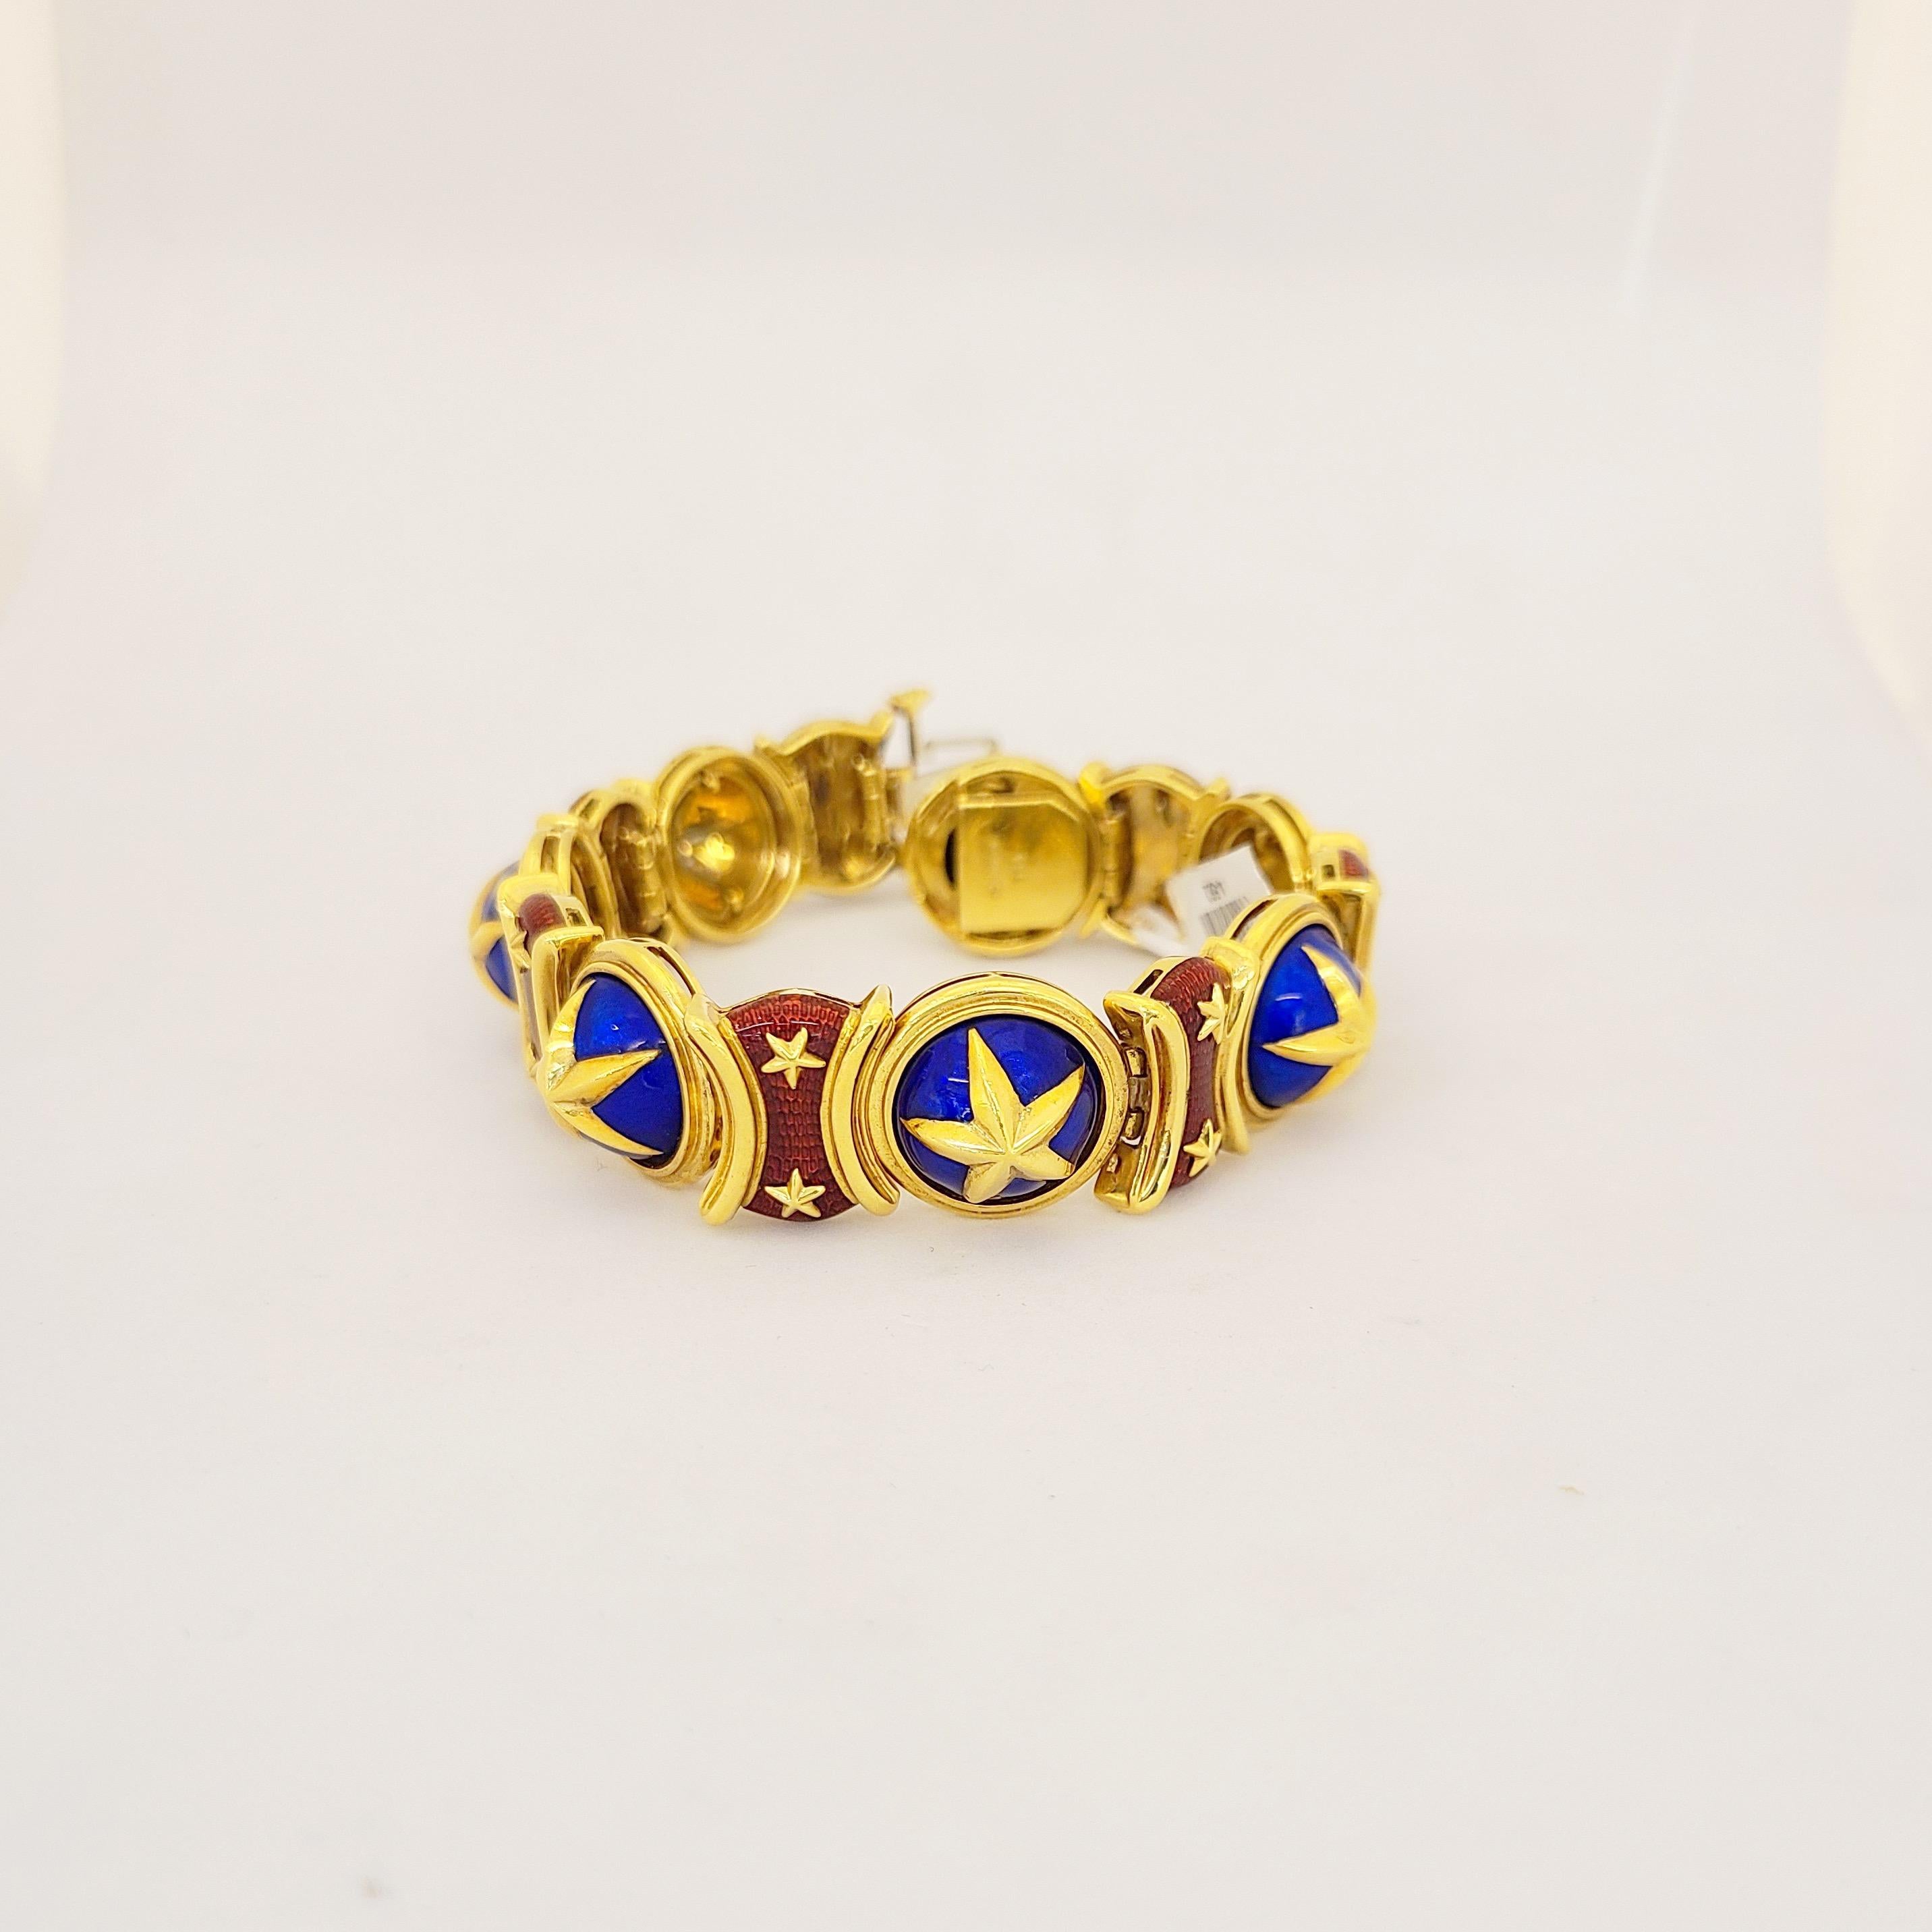 Classic 18 karat yellow gold bracelet designed with 14  alternating enamel links. A beautiful  gold star motif  on vibrant blue and red guicholled enamel. The bracelet measures 7.5